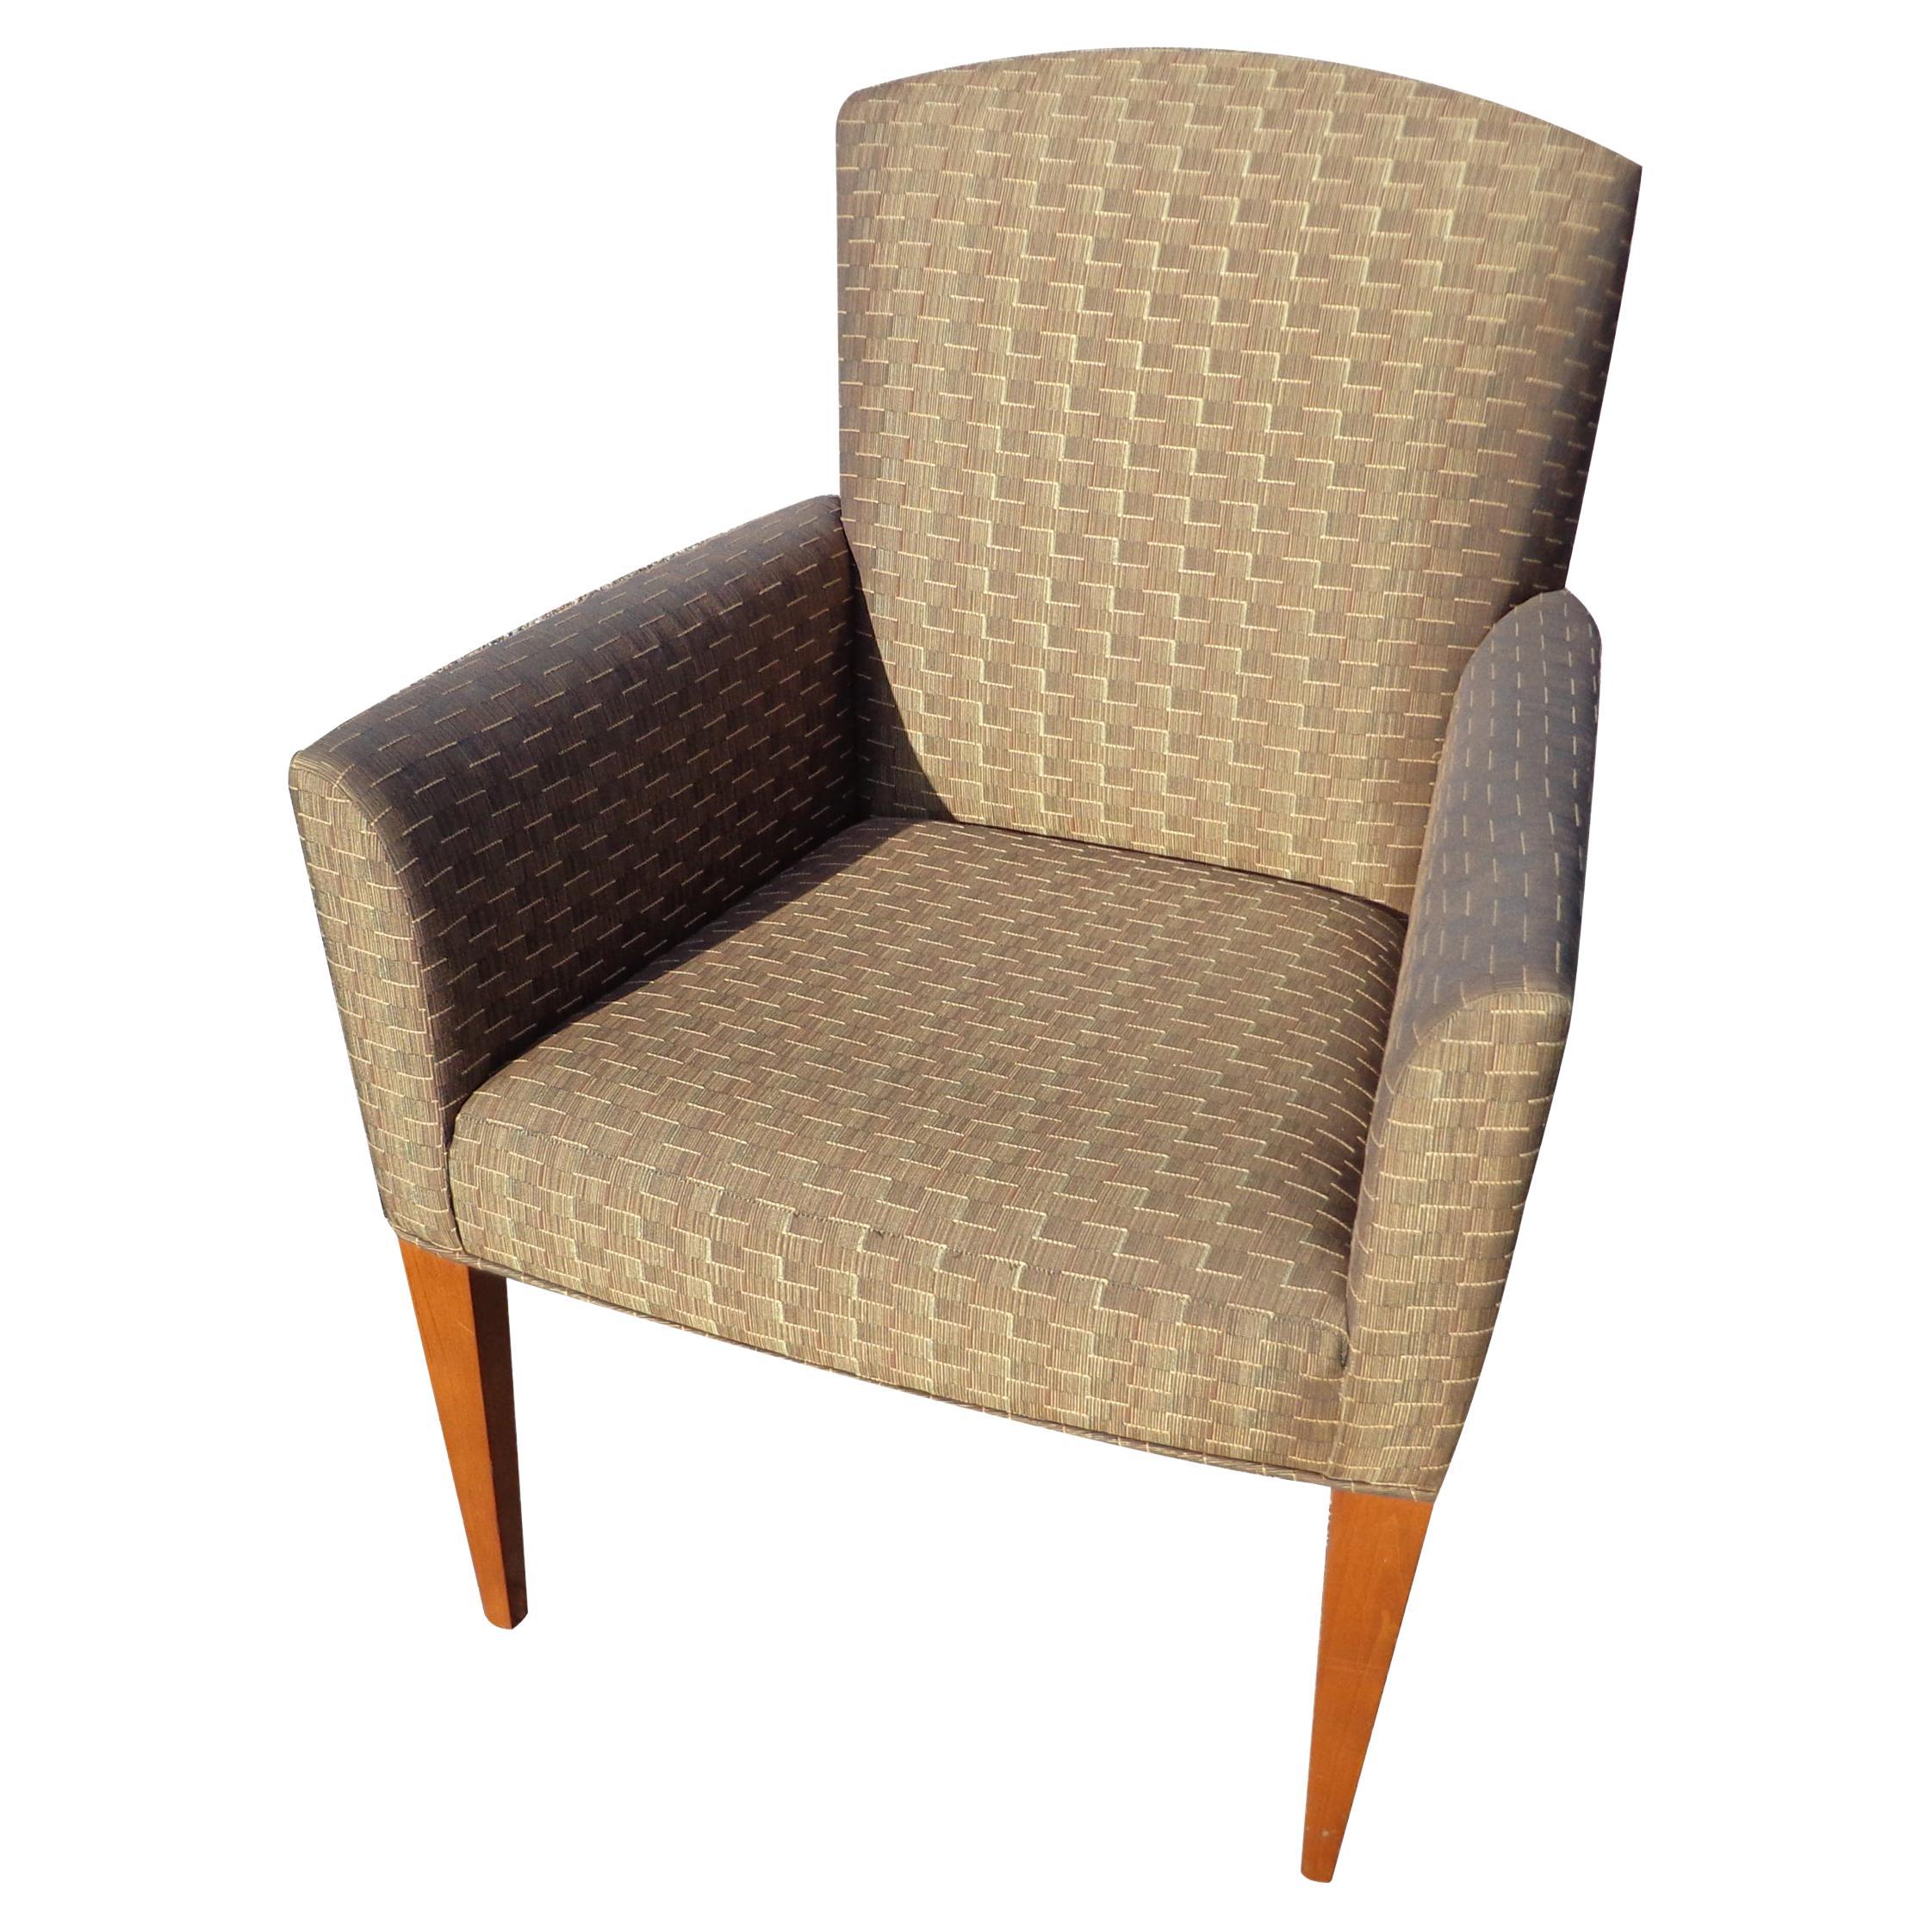 David Edward lounge chair

Modern lounge or guest chair with tapered legs and rich poly blend upholstery.
 